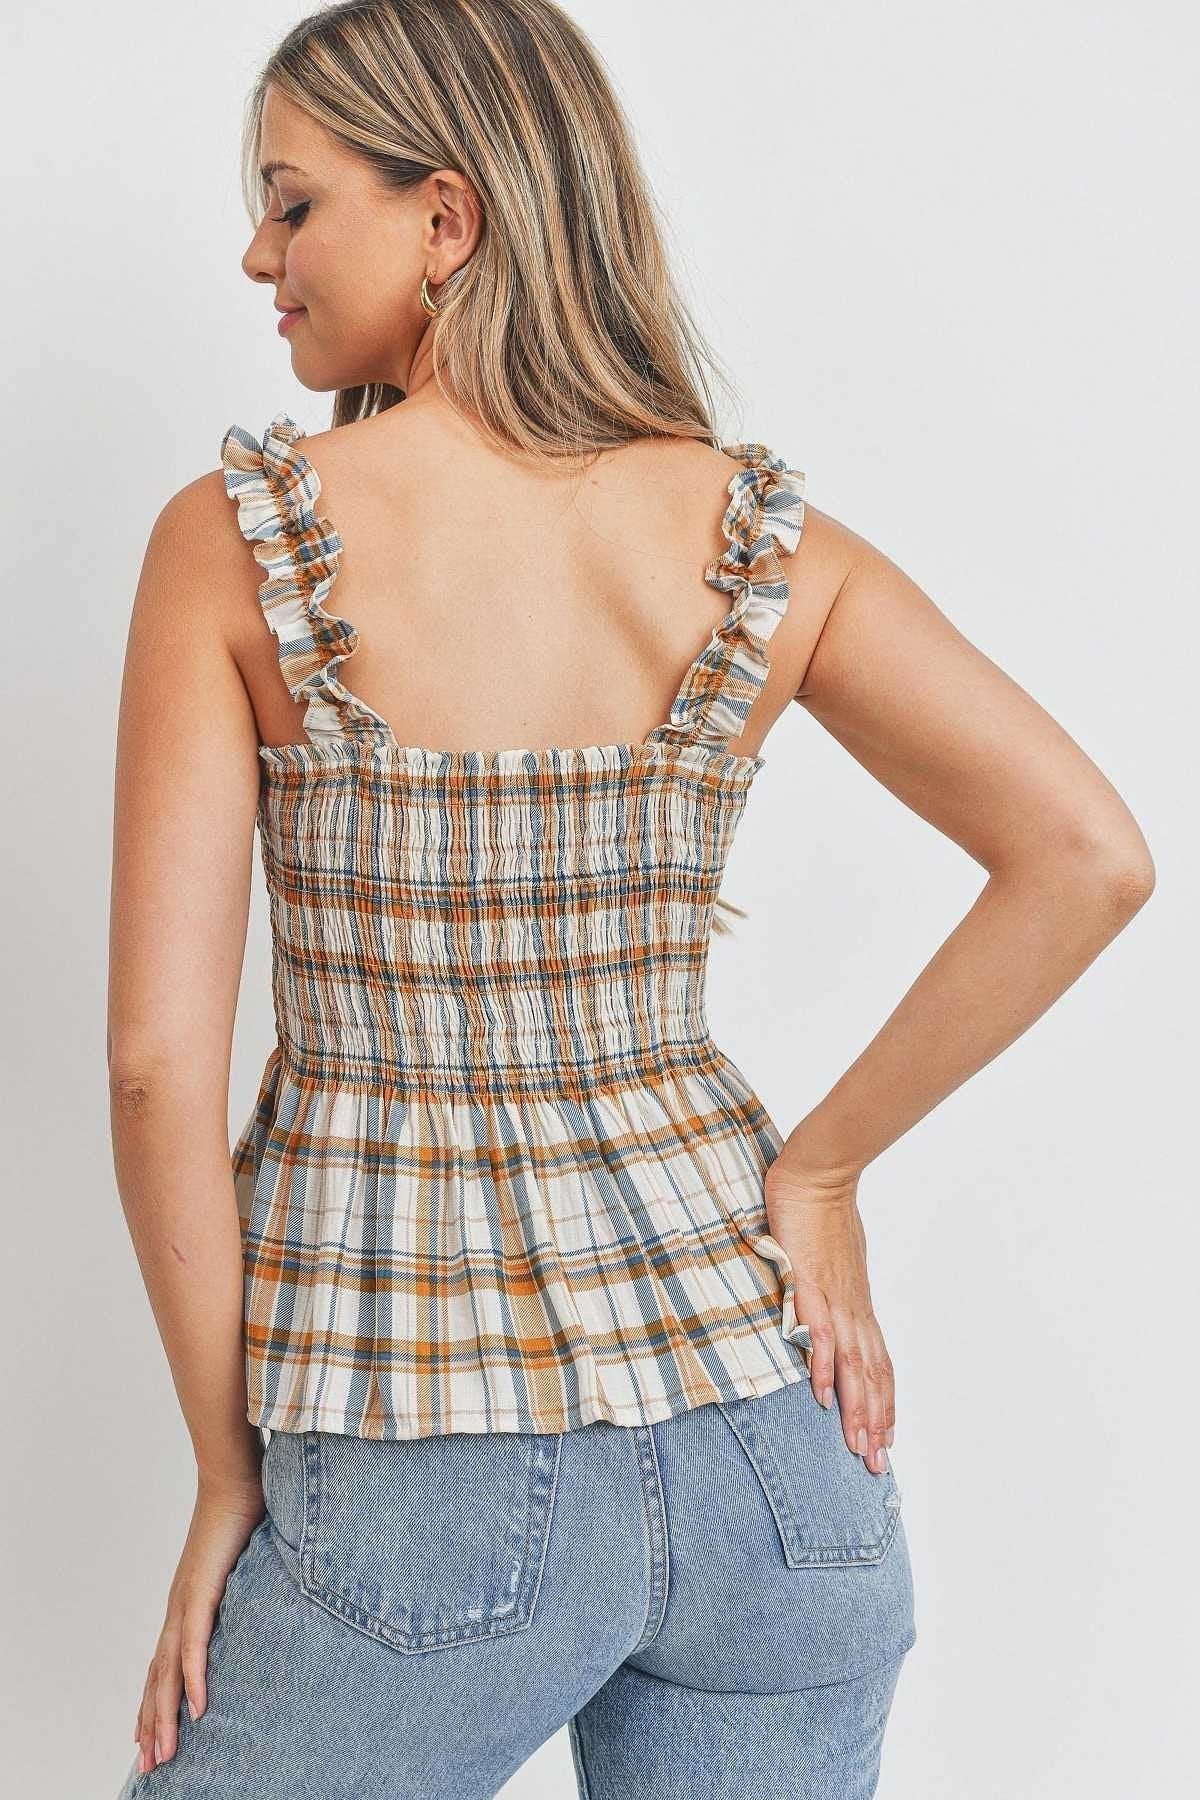 - Ruffle Strap Smocked Peplum Plaid Halter Top - Ships from The US - womens halter top at TFC&H Co.